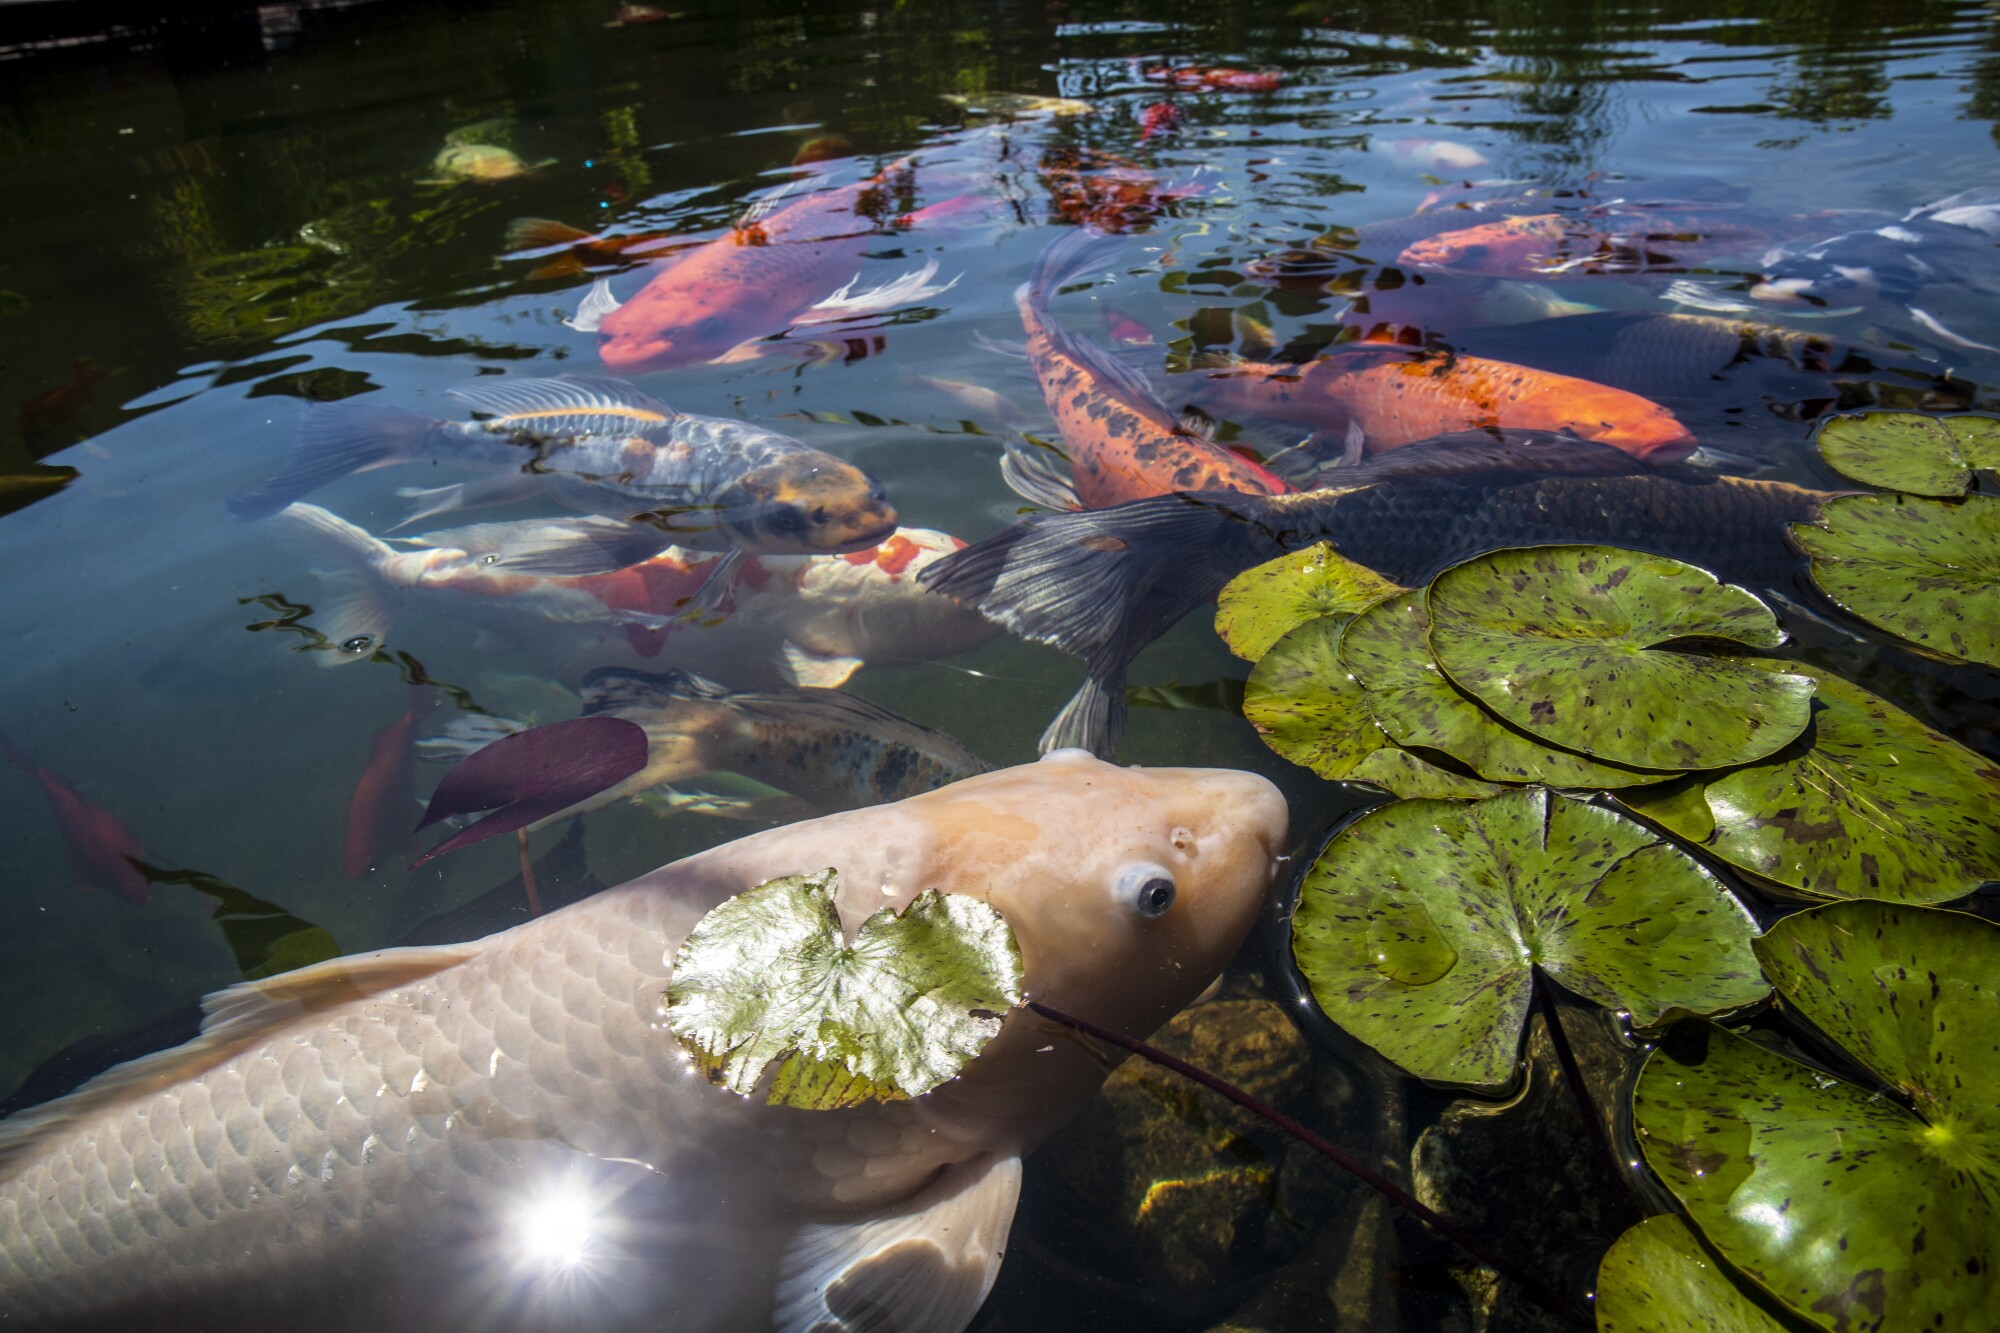 Koi fish in a pond swimming below lily pads